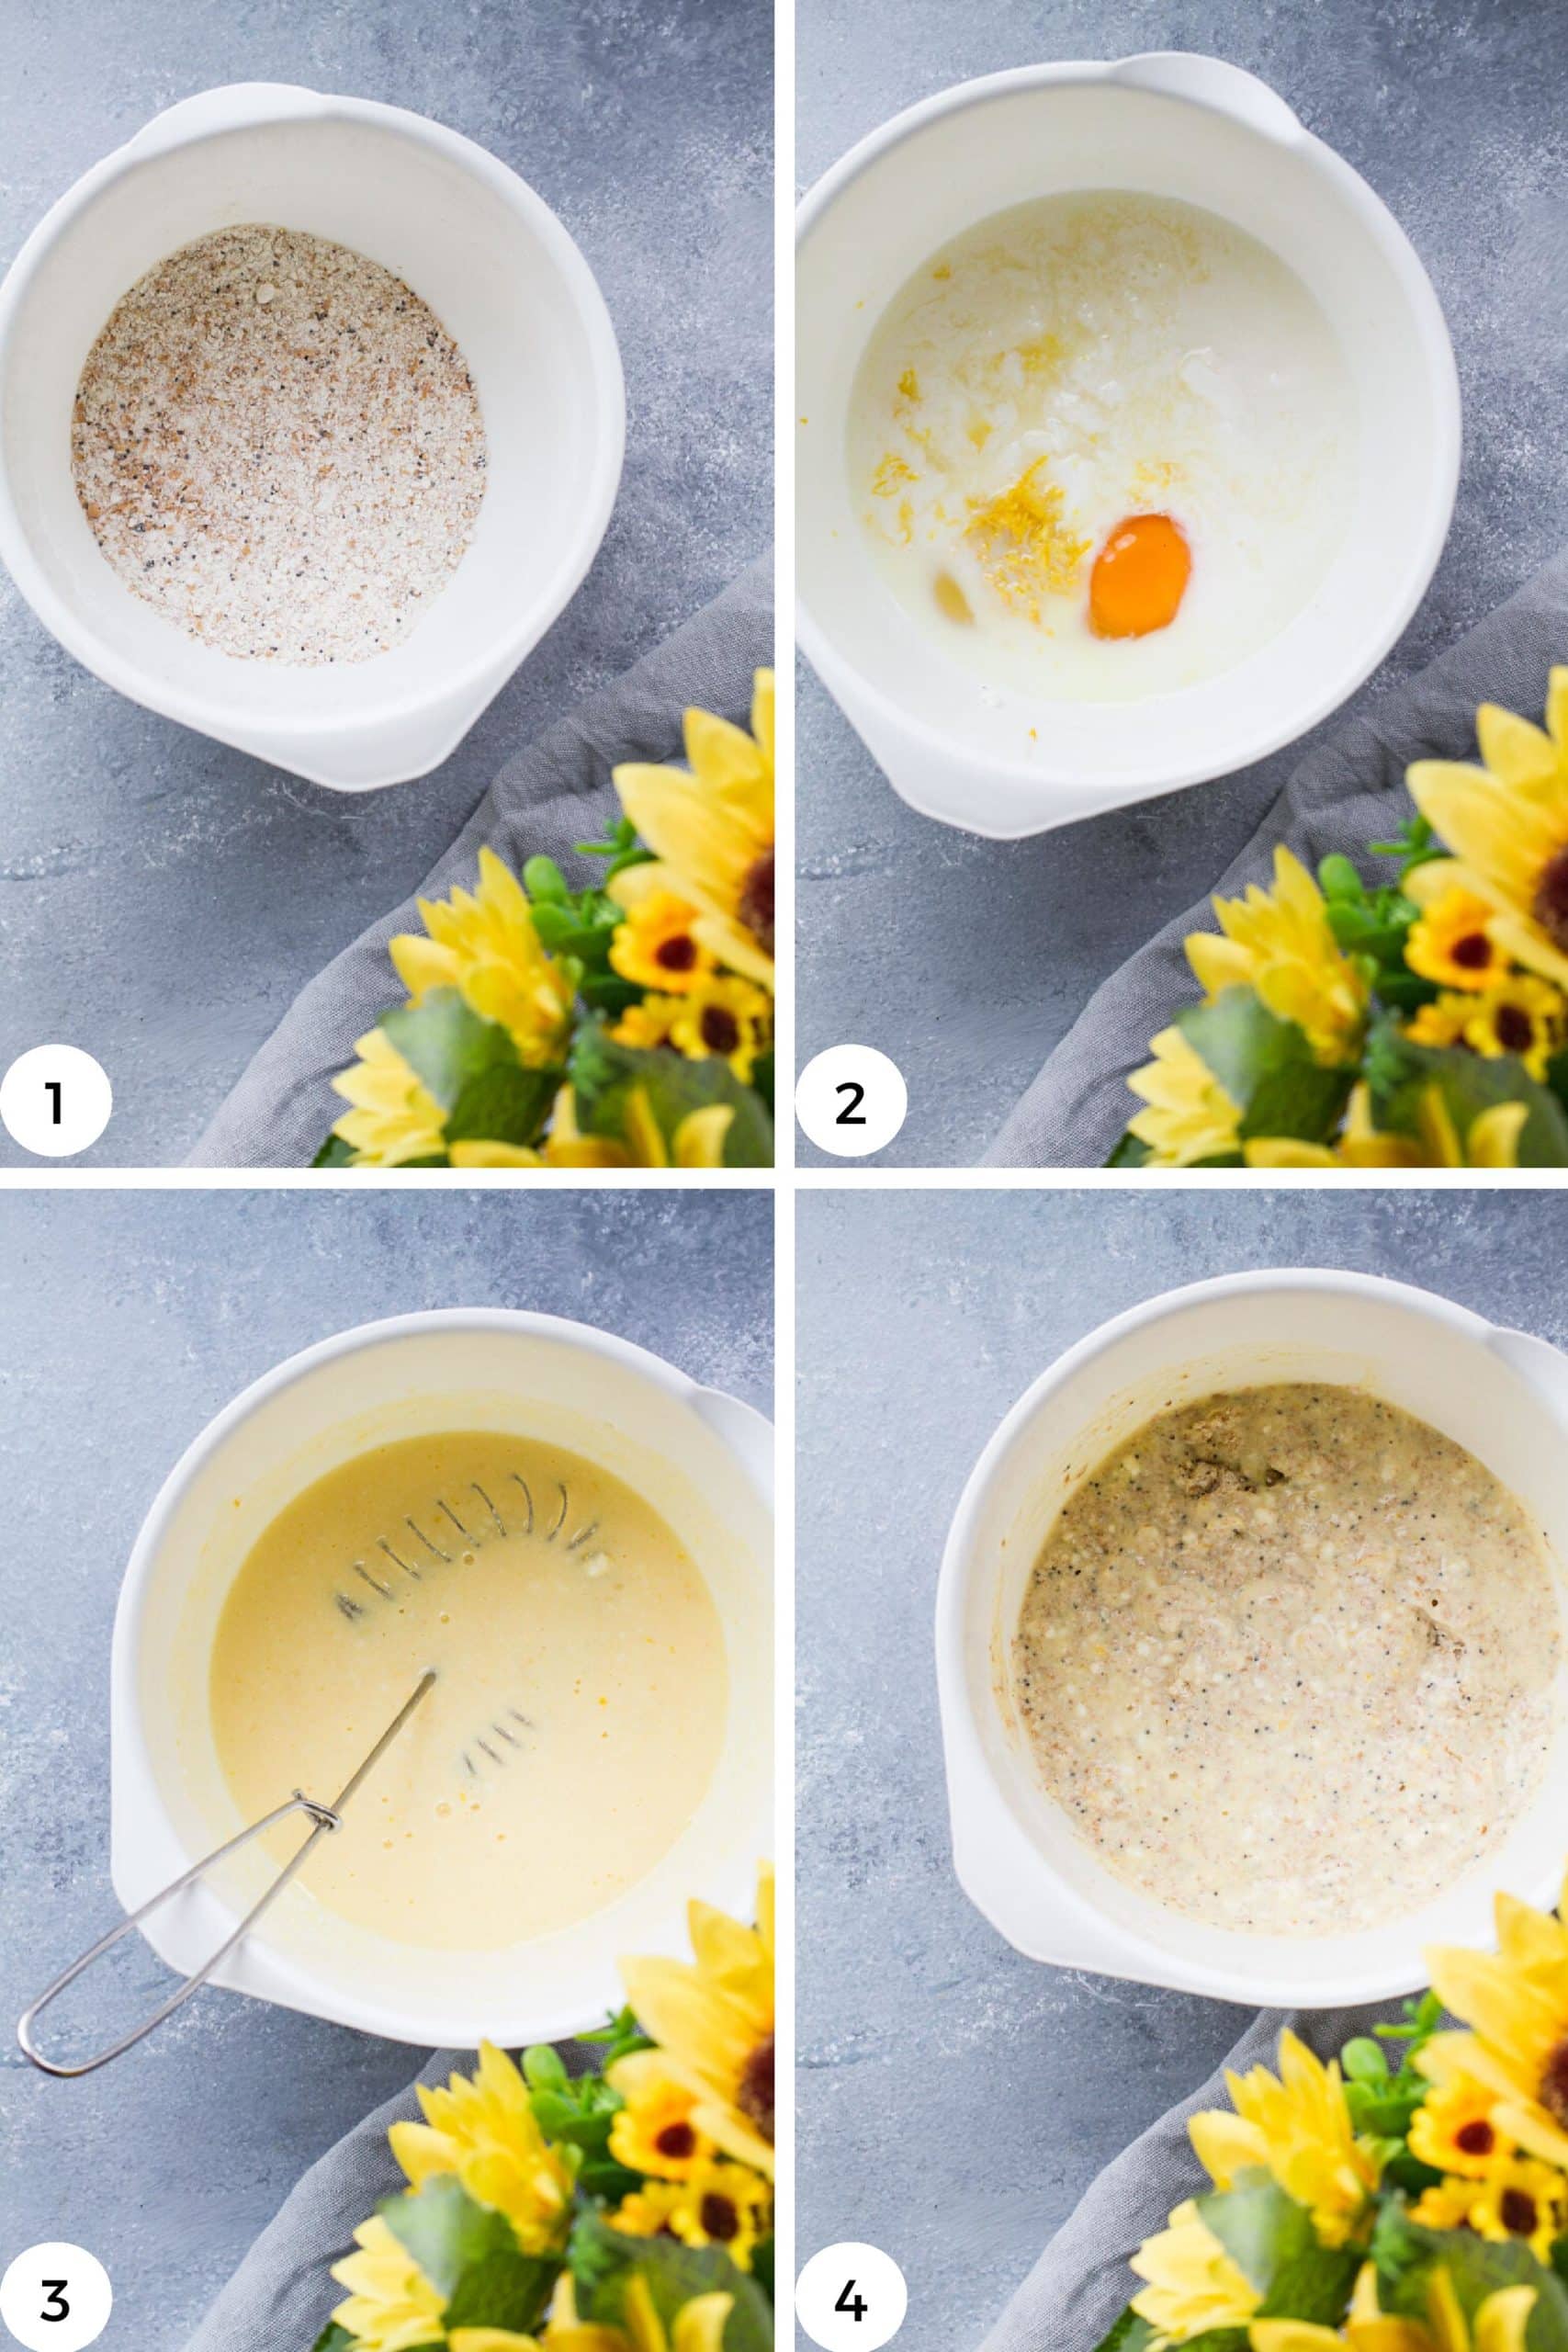 Steps on how to mix pancake batter.